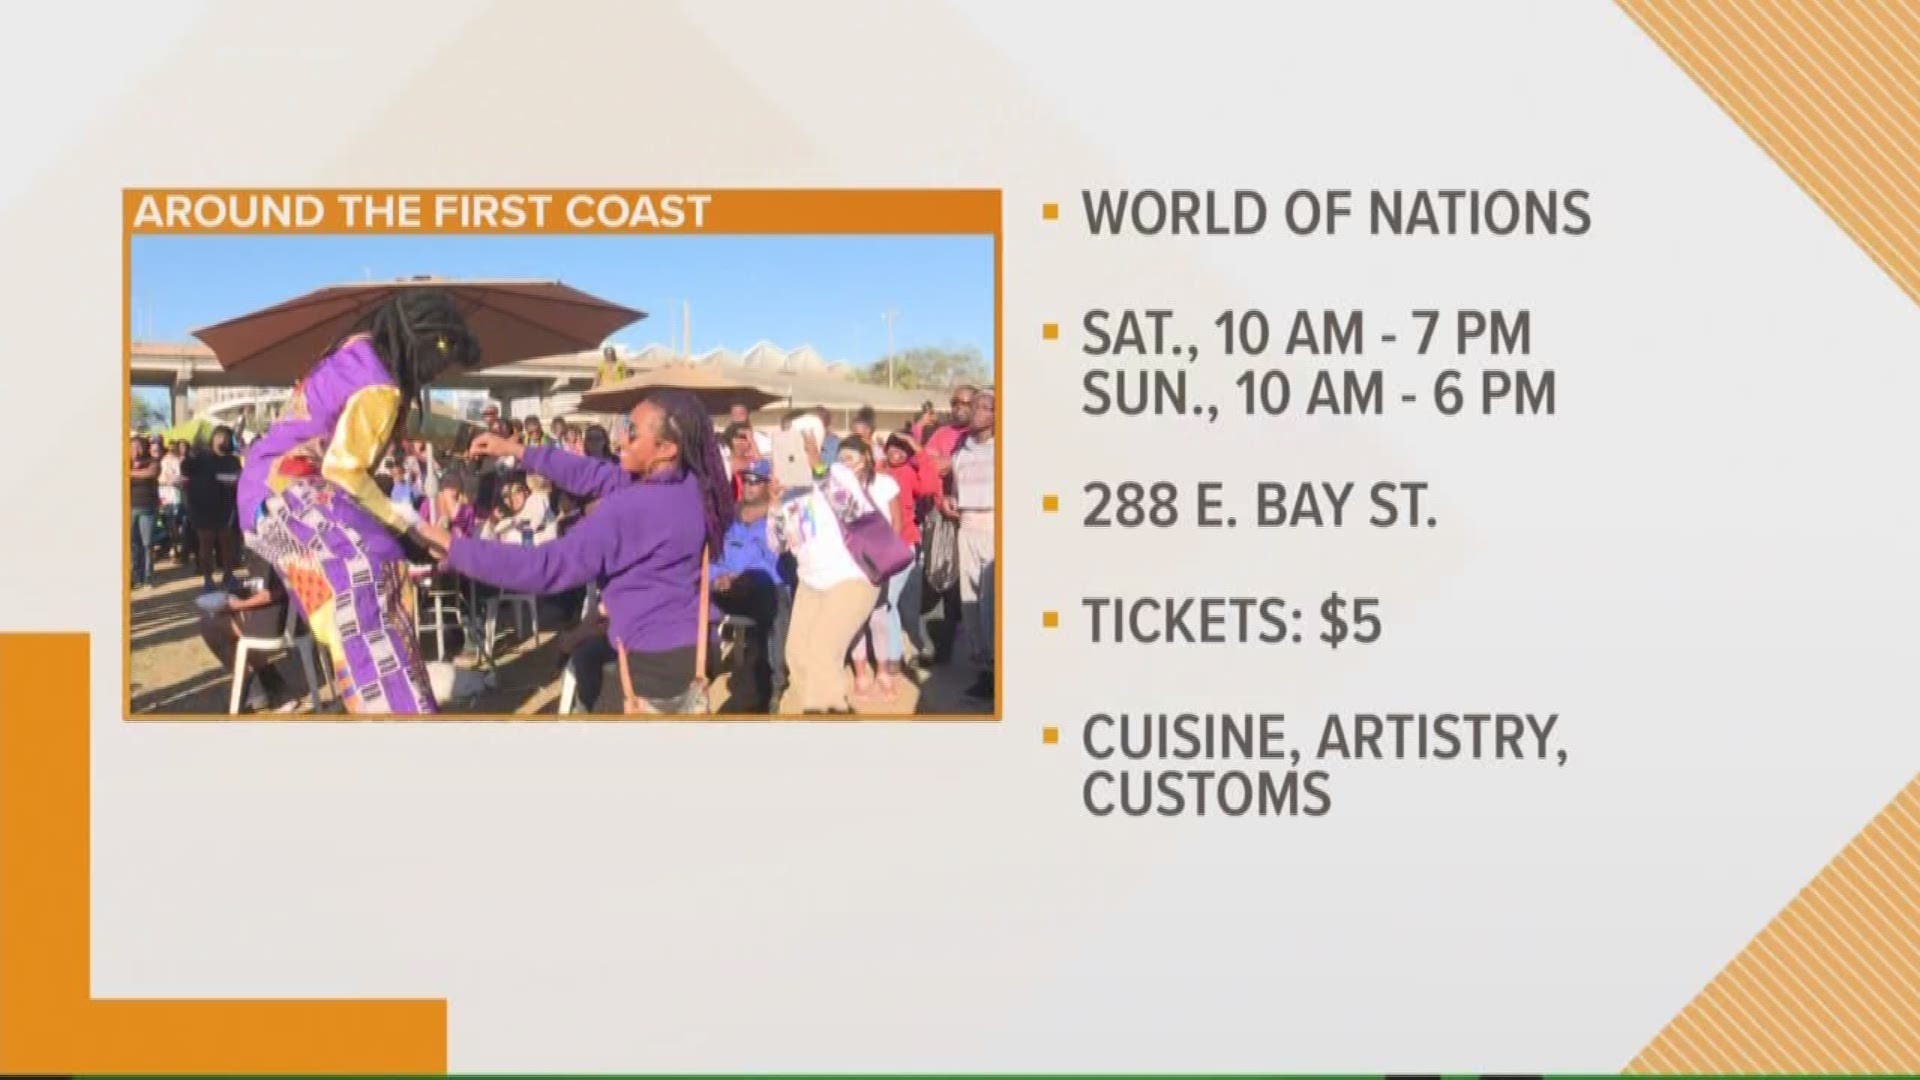 There are so many events on the First Coast this weekend. Be sure to get out and enjoy them!